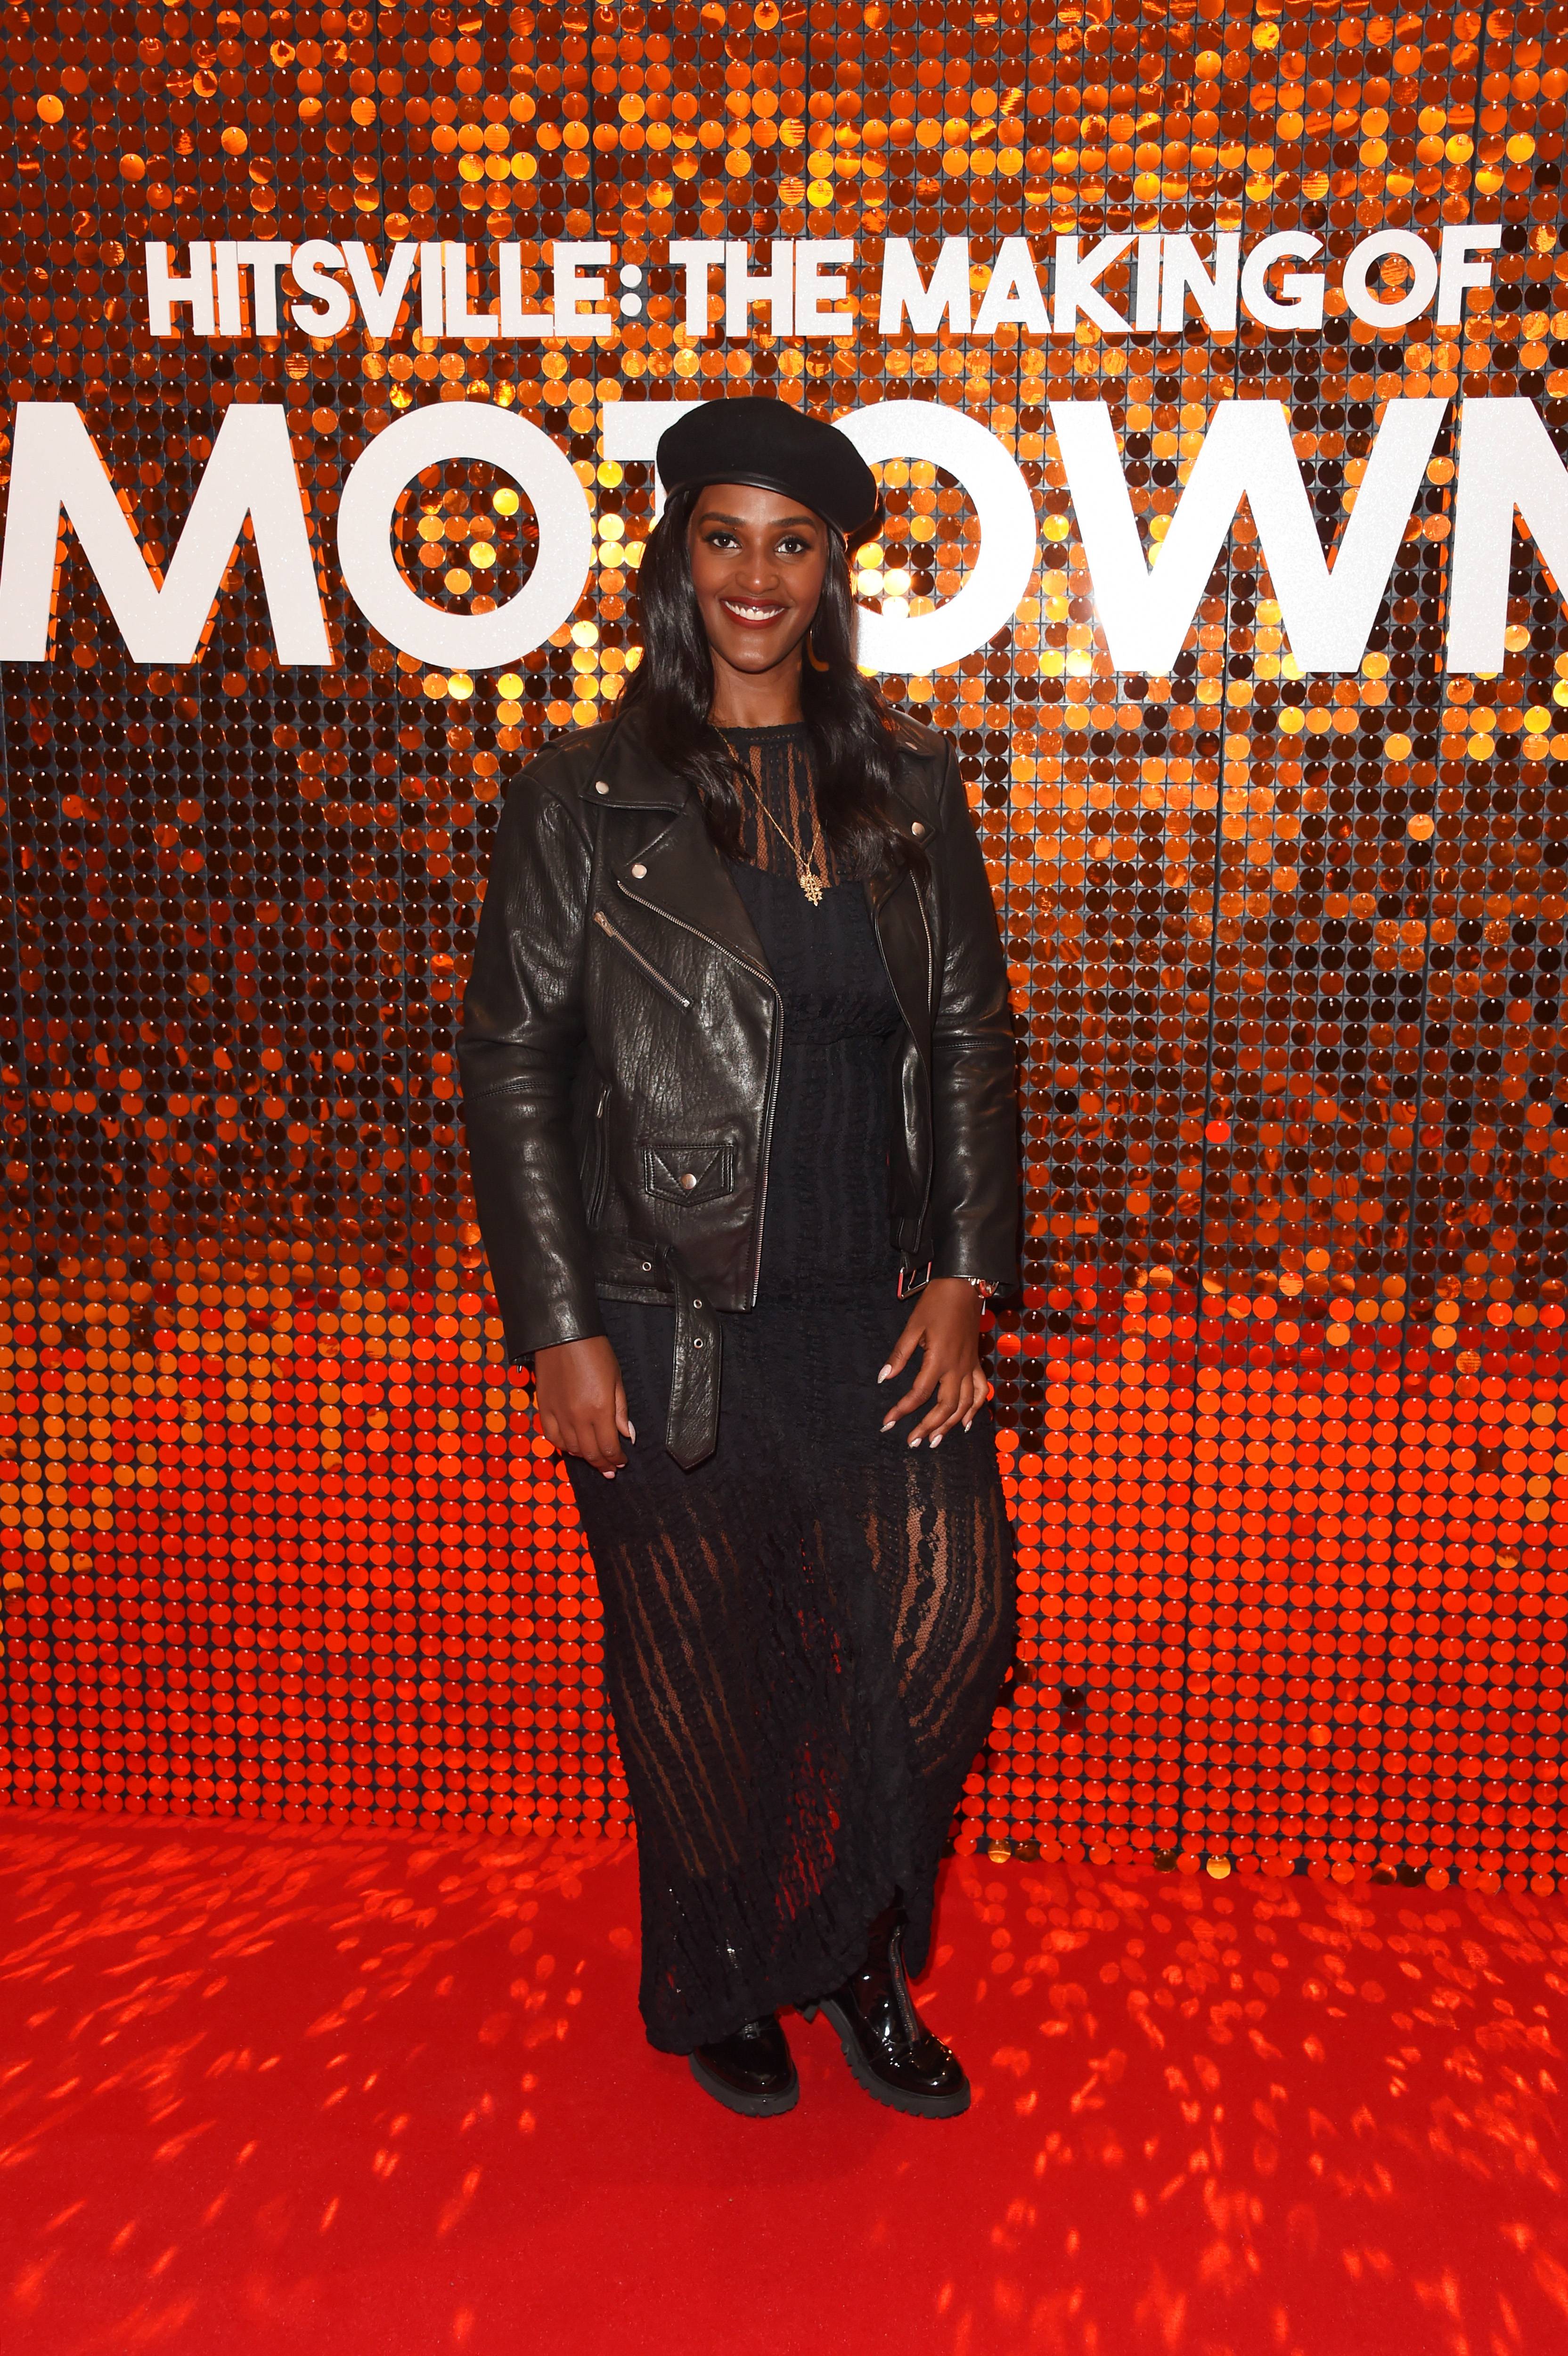 LONDON, ENGLAND - SEPTEMBER 23:   President of Motown Records Ethiopia Habtemariam attends the European Premiere of "Hitsville: The Making Of Motown" at Odeon Luxe Leicester Square on September 23, 2019 in London, England.  (Photo by David M. Benett/Dave Benett/WireImage)